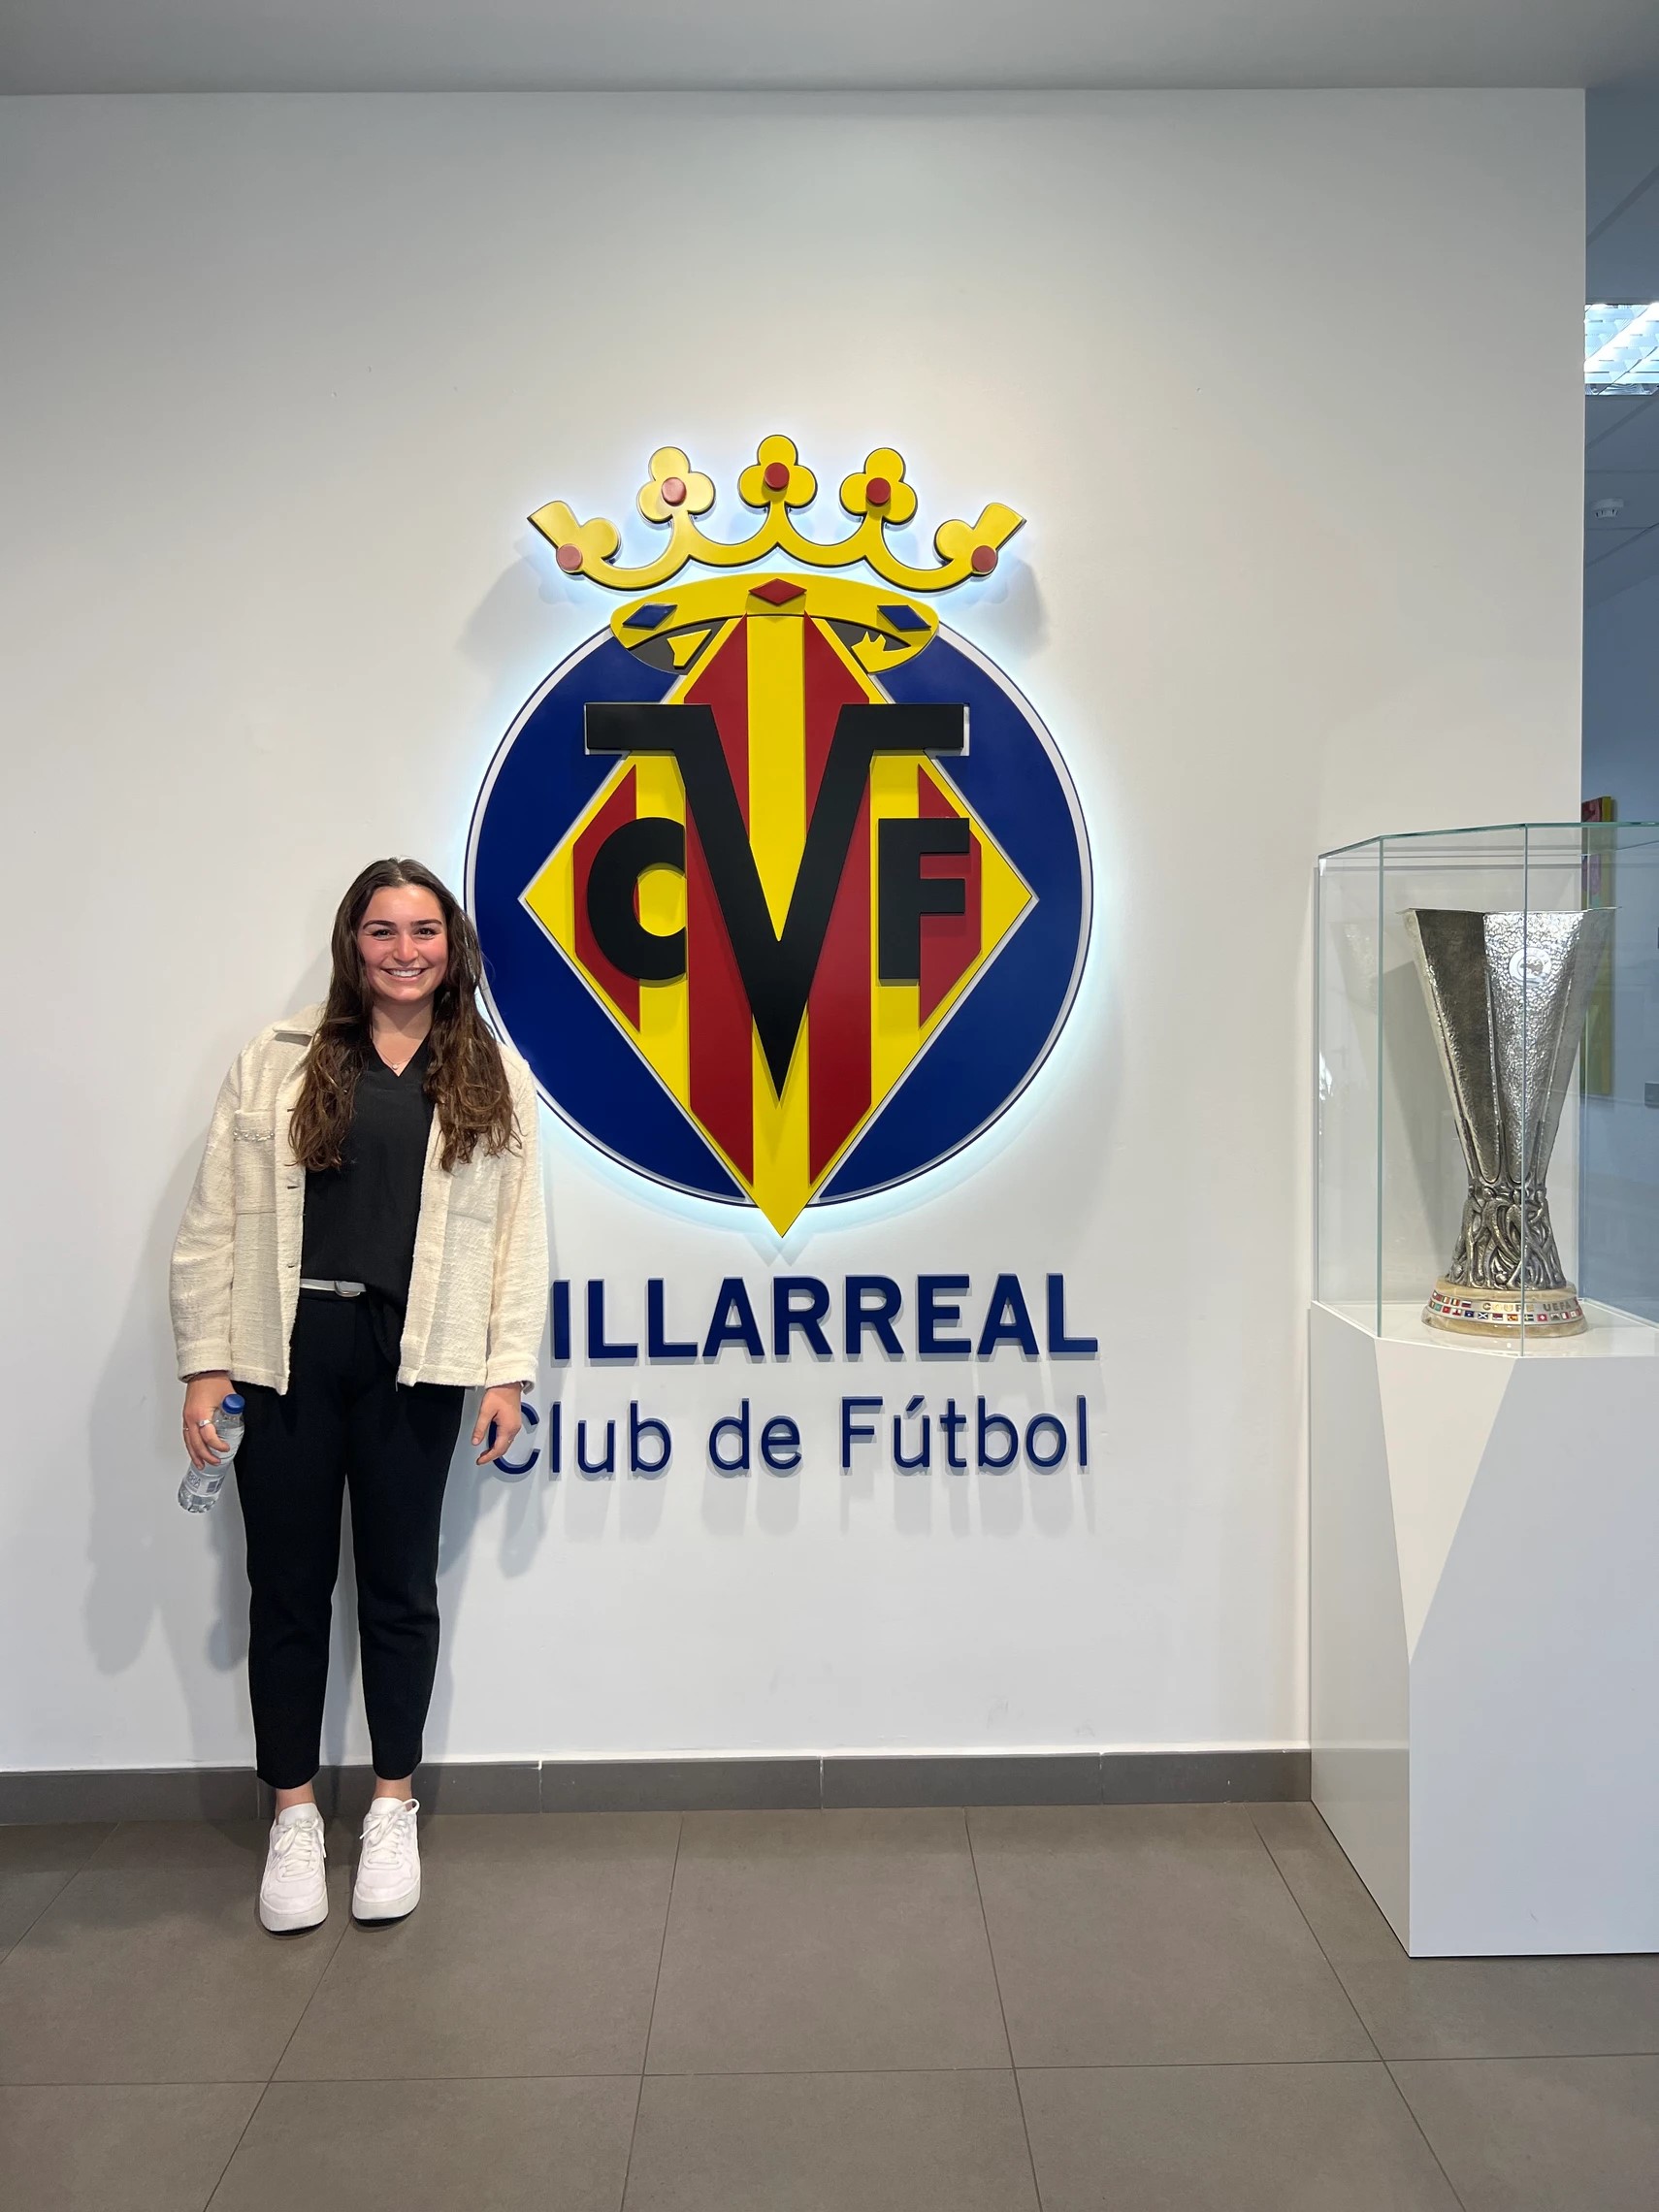 Ella in front of the Villarreal CF logo and the Europa league trophy